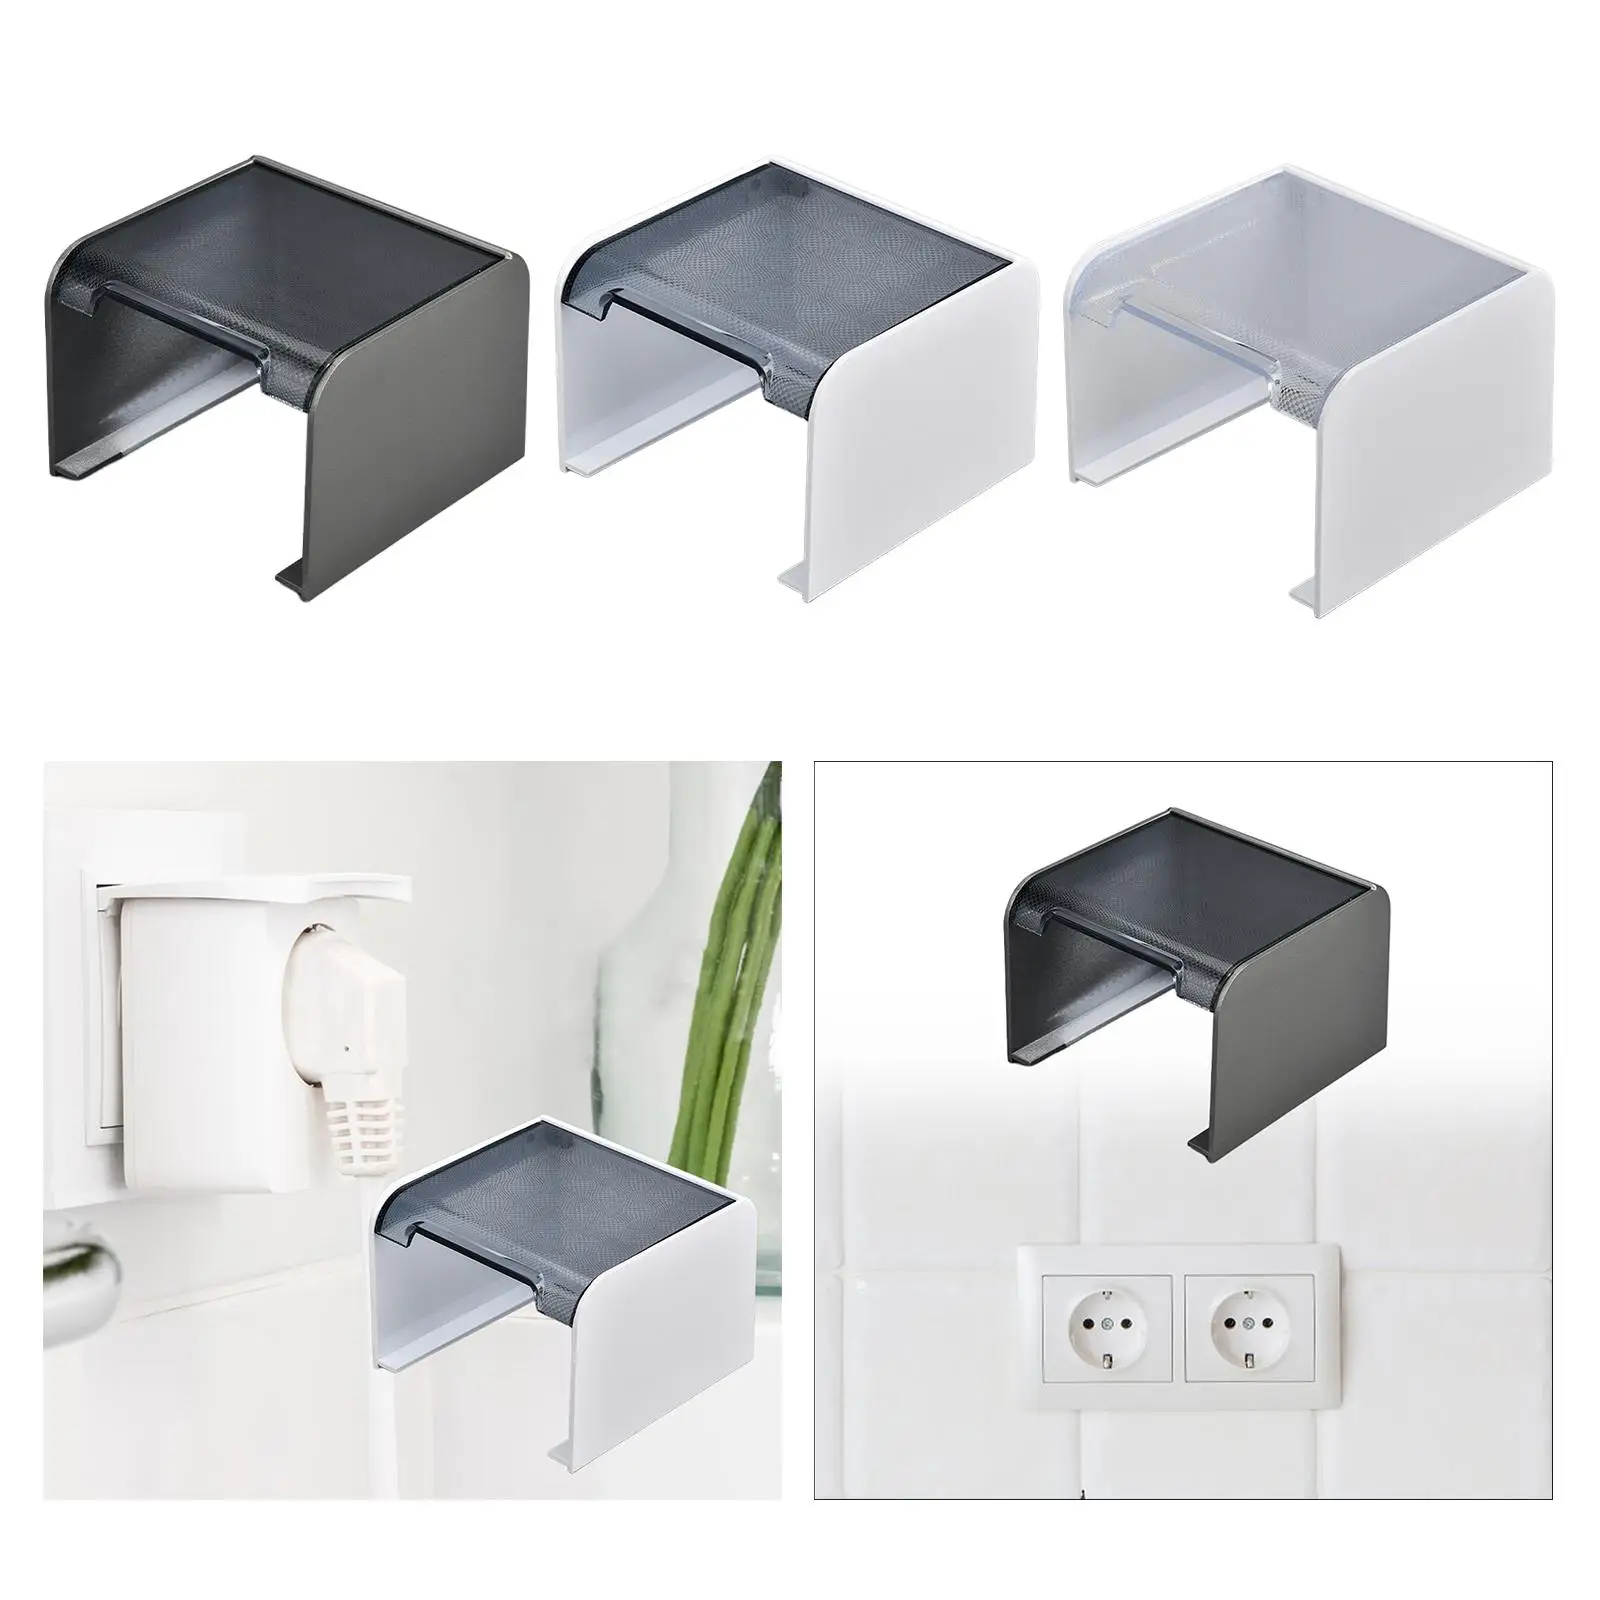 Socket Cover Socket Protection Box 86 Type Switch Box for Home Improvement Warehouse Restaurant Indoor Outdoor